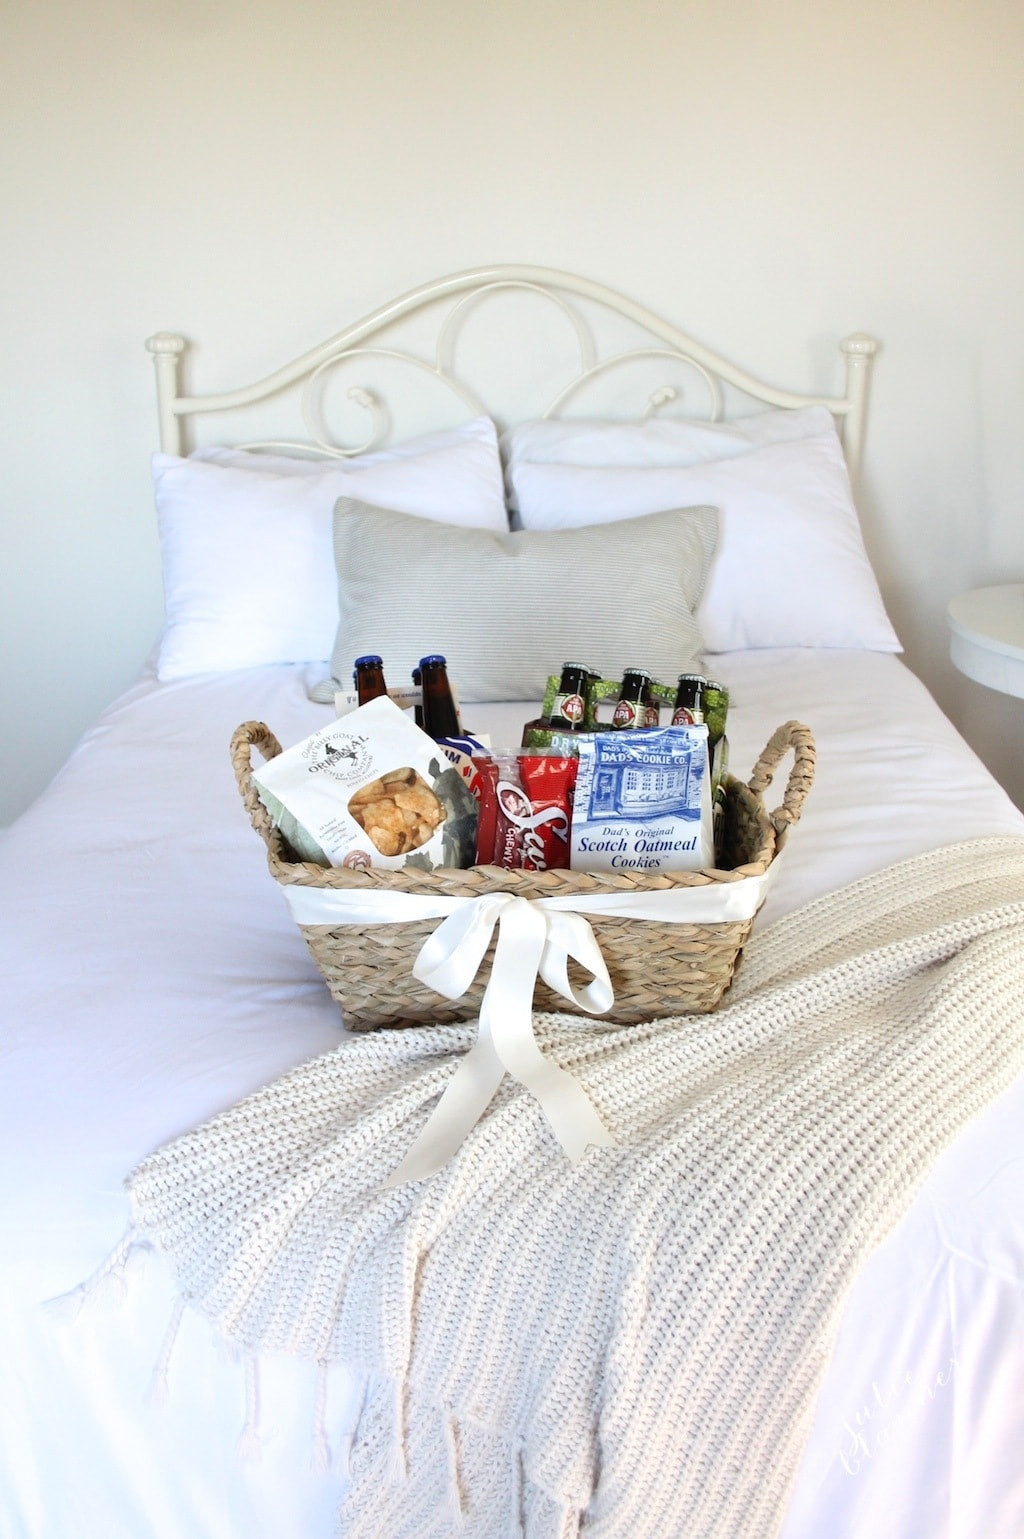 Welcome Gift Basket Ideas
 Preparing for Guests